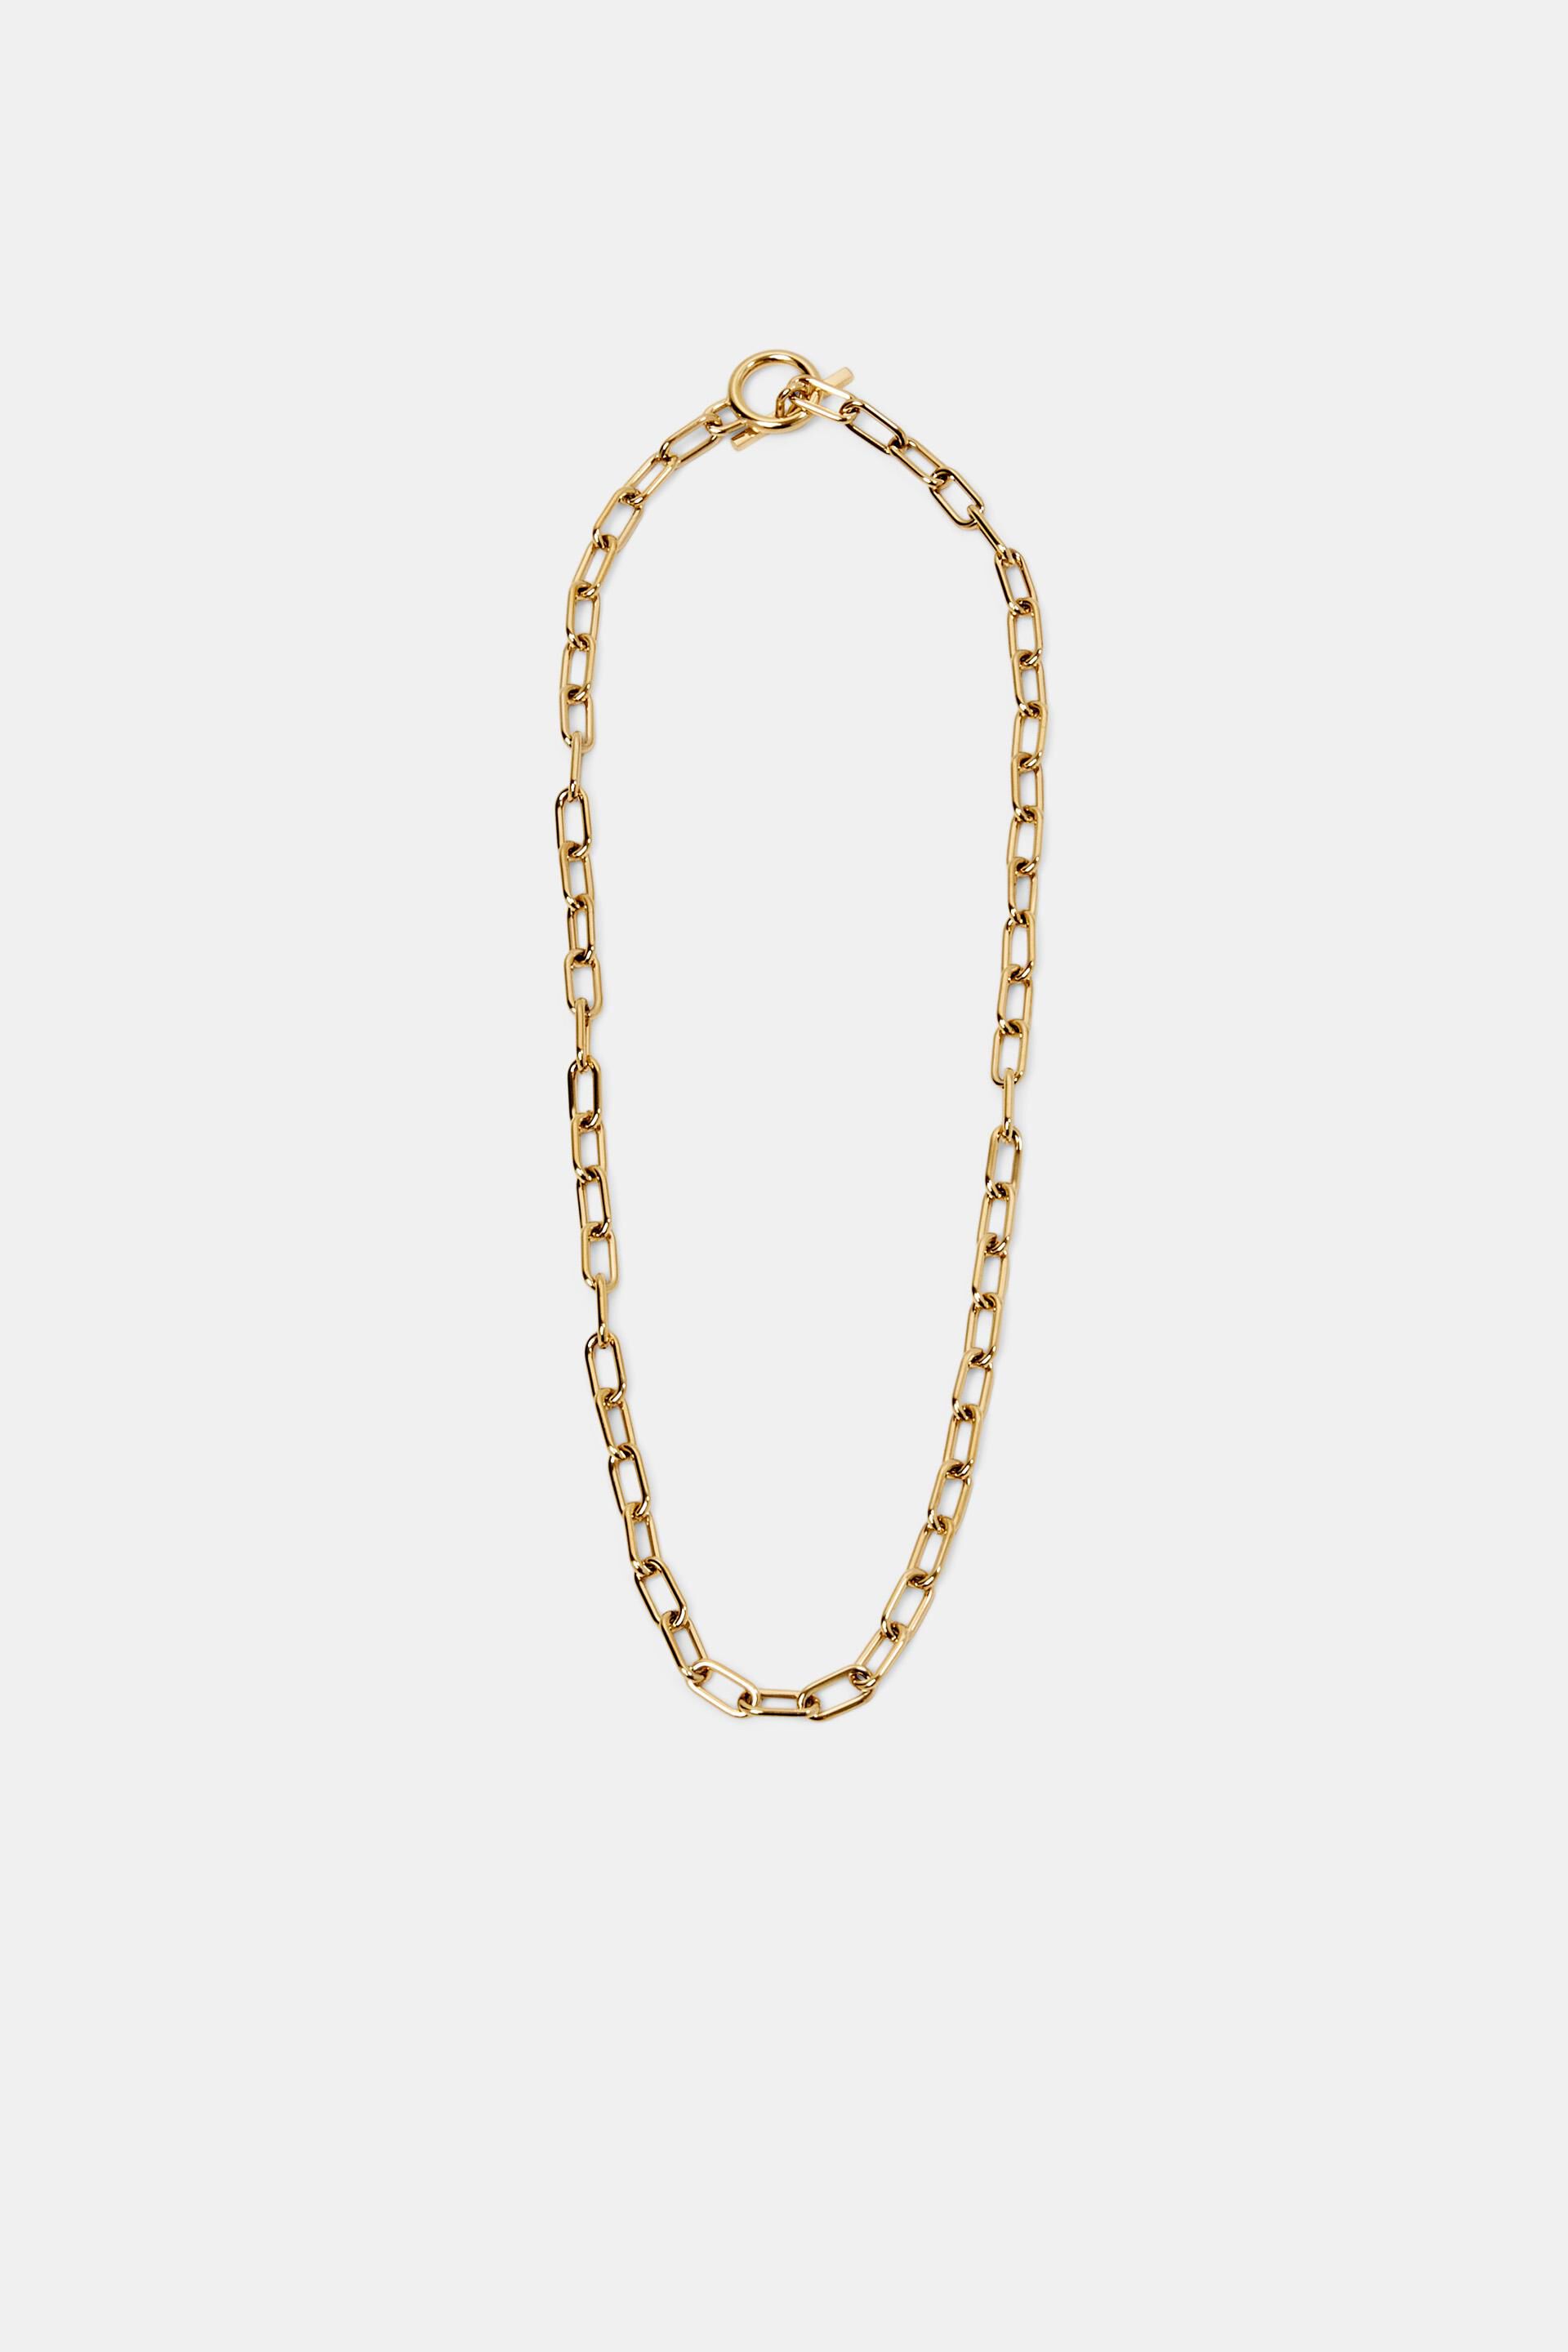 Esprit Chain necklace, steel stainless